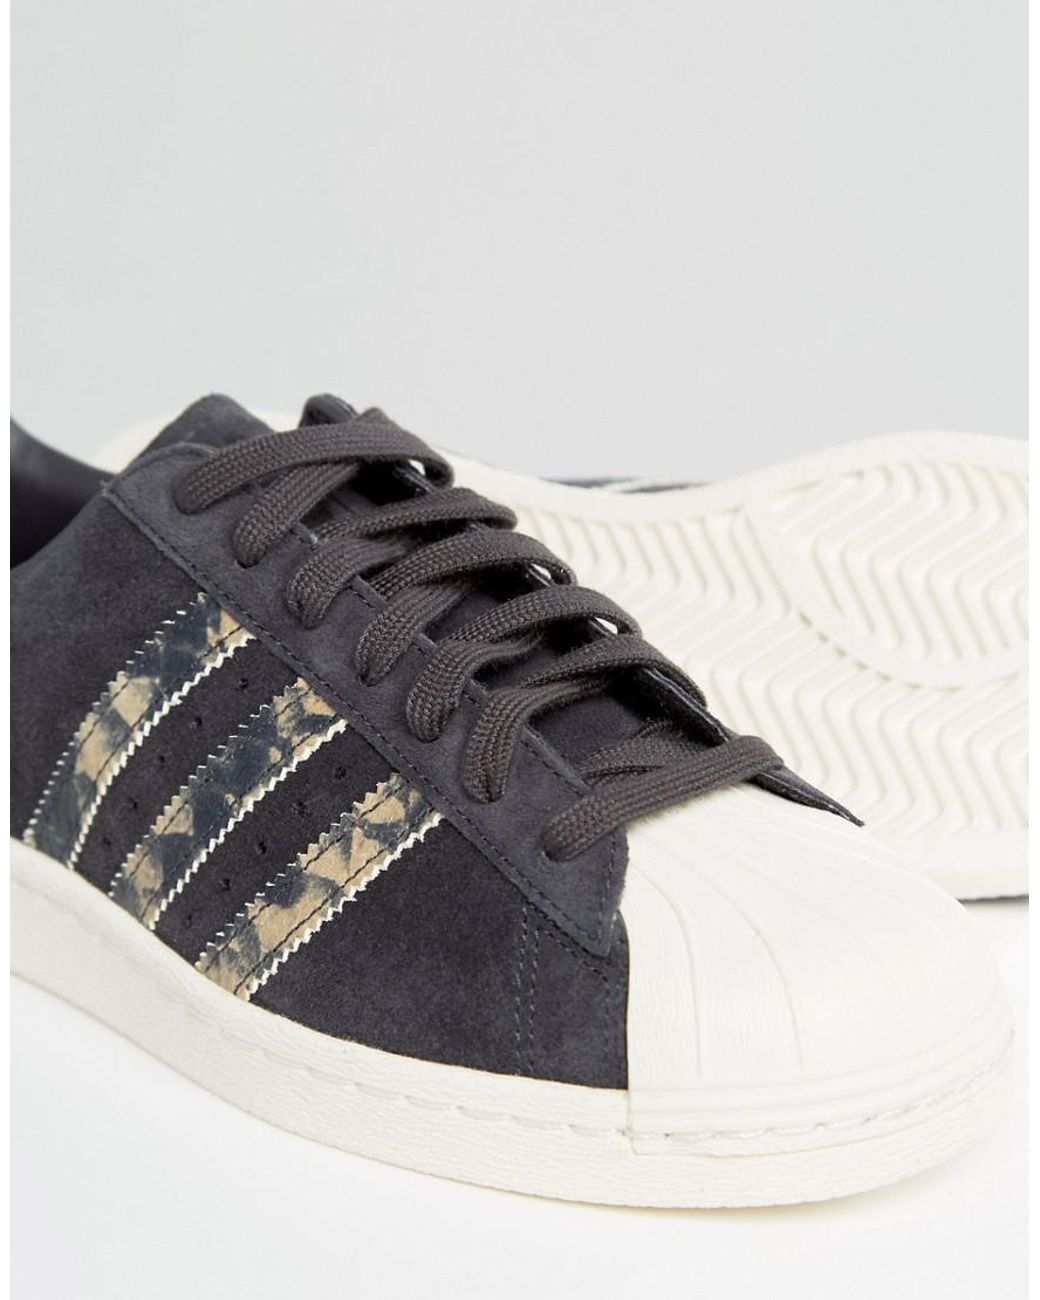 Moment Devastate Disobedience adidas Superstar Suede And Snakeskin Sneakers in Black | Lyst